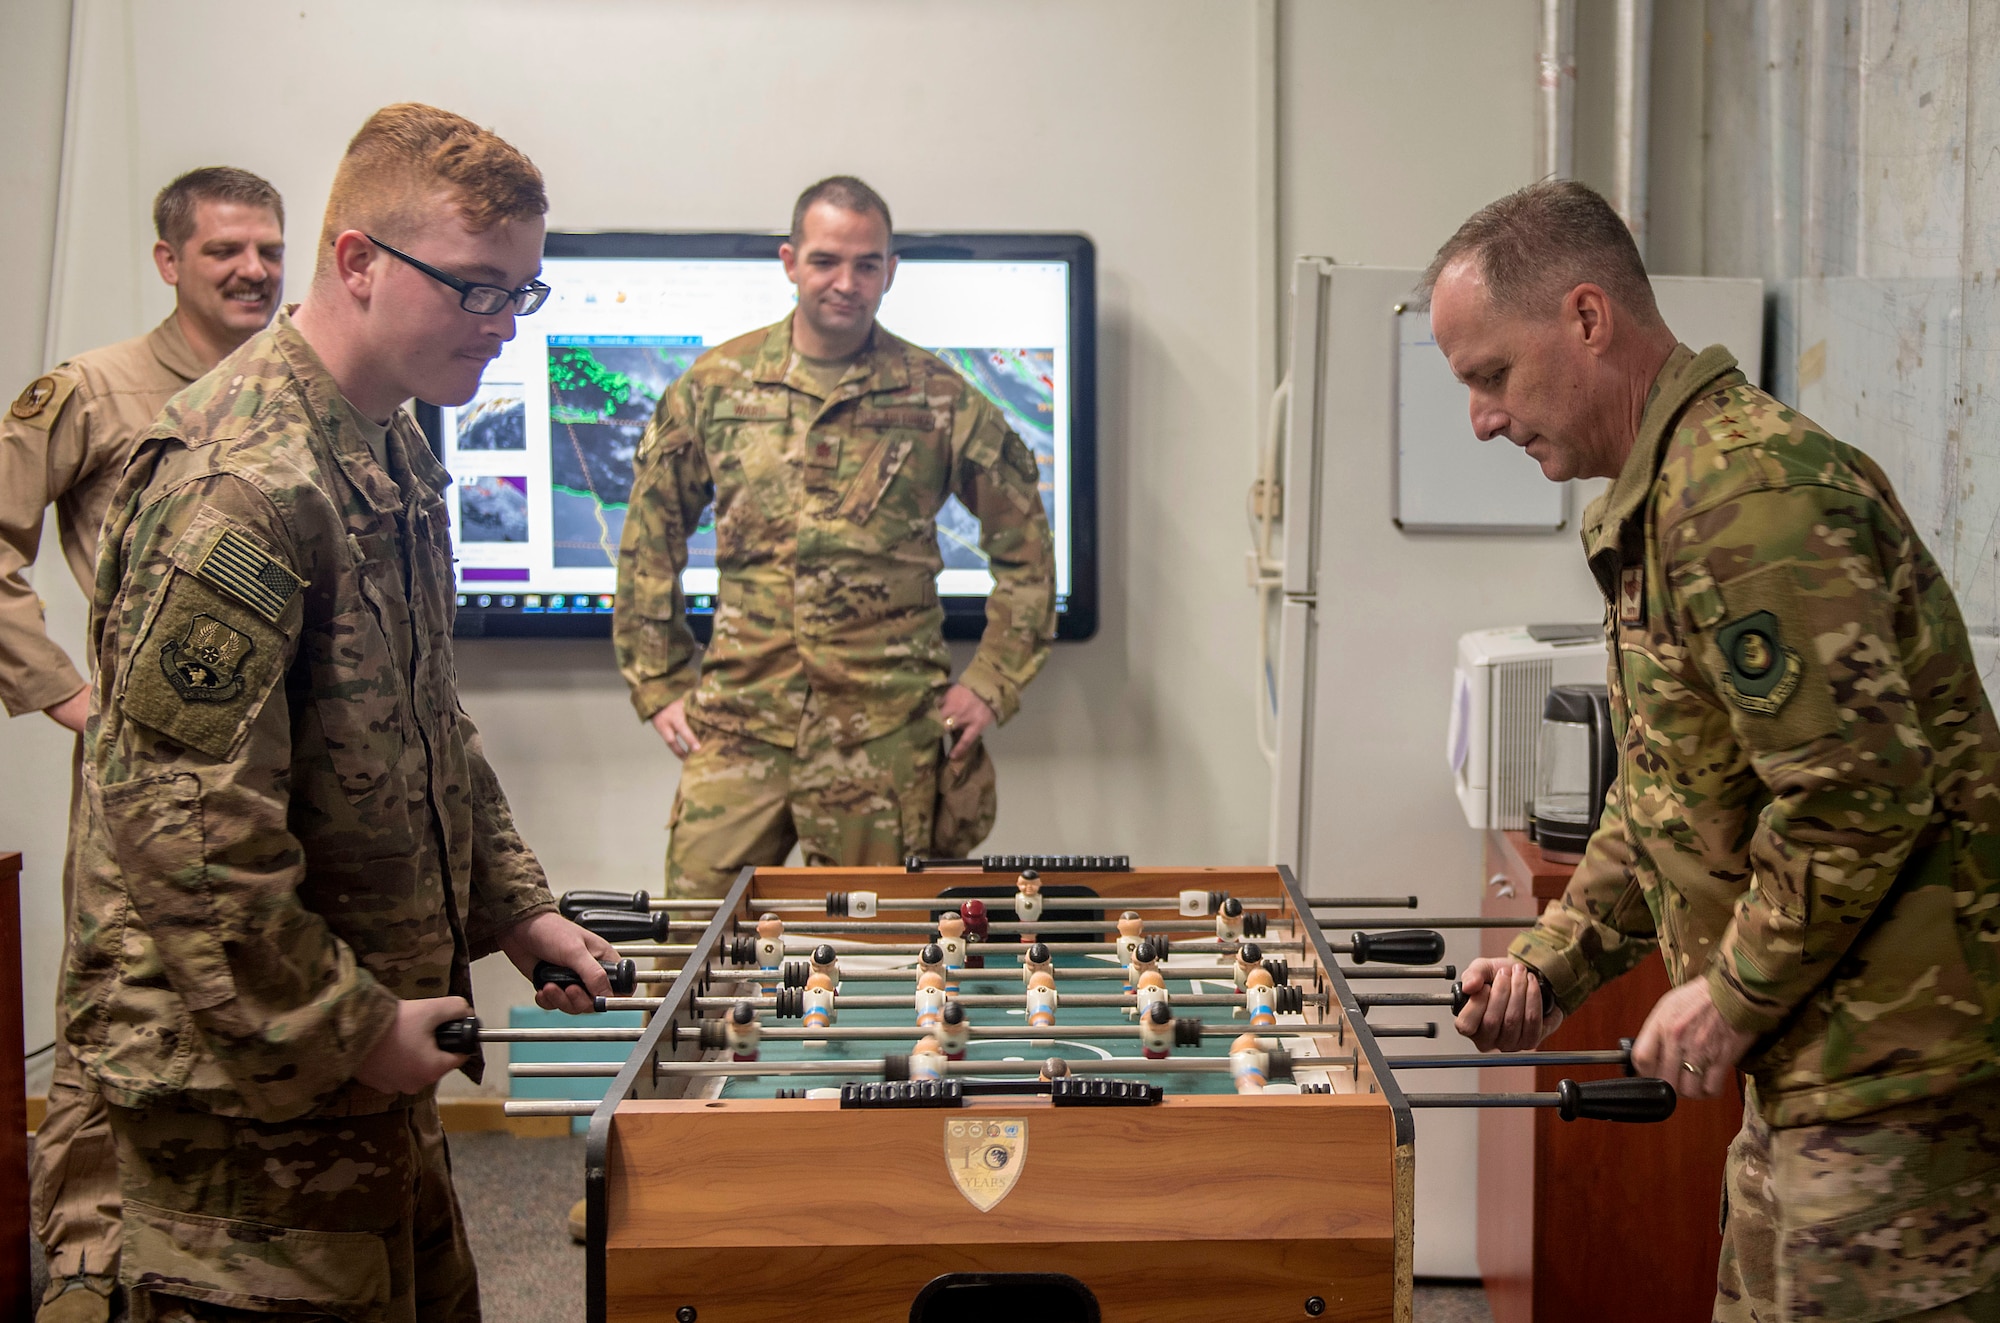 U.S. Air Force Maj. Gen. John M. Wood, Third Air Force commander and U.S. Air Force Senior Airman David Alley, 22nd Expeditionary Air Refueling Squadron weather forecaster, play foosball after an immersion briefing at Incirlik Air Base, Turkey, Feb. 22, 2019.